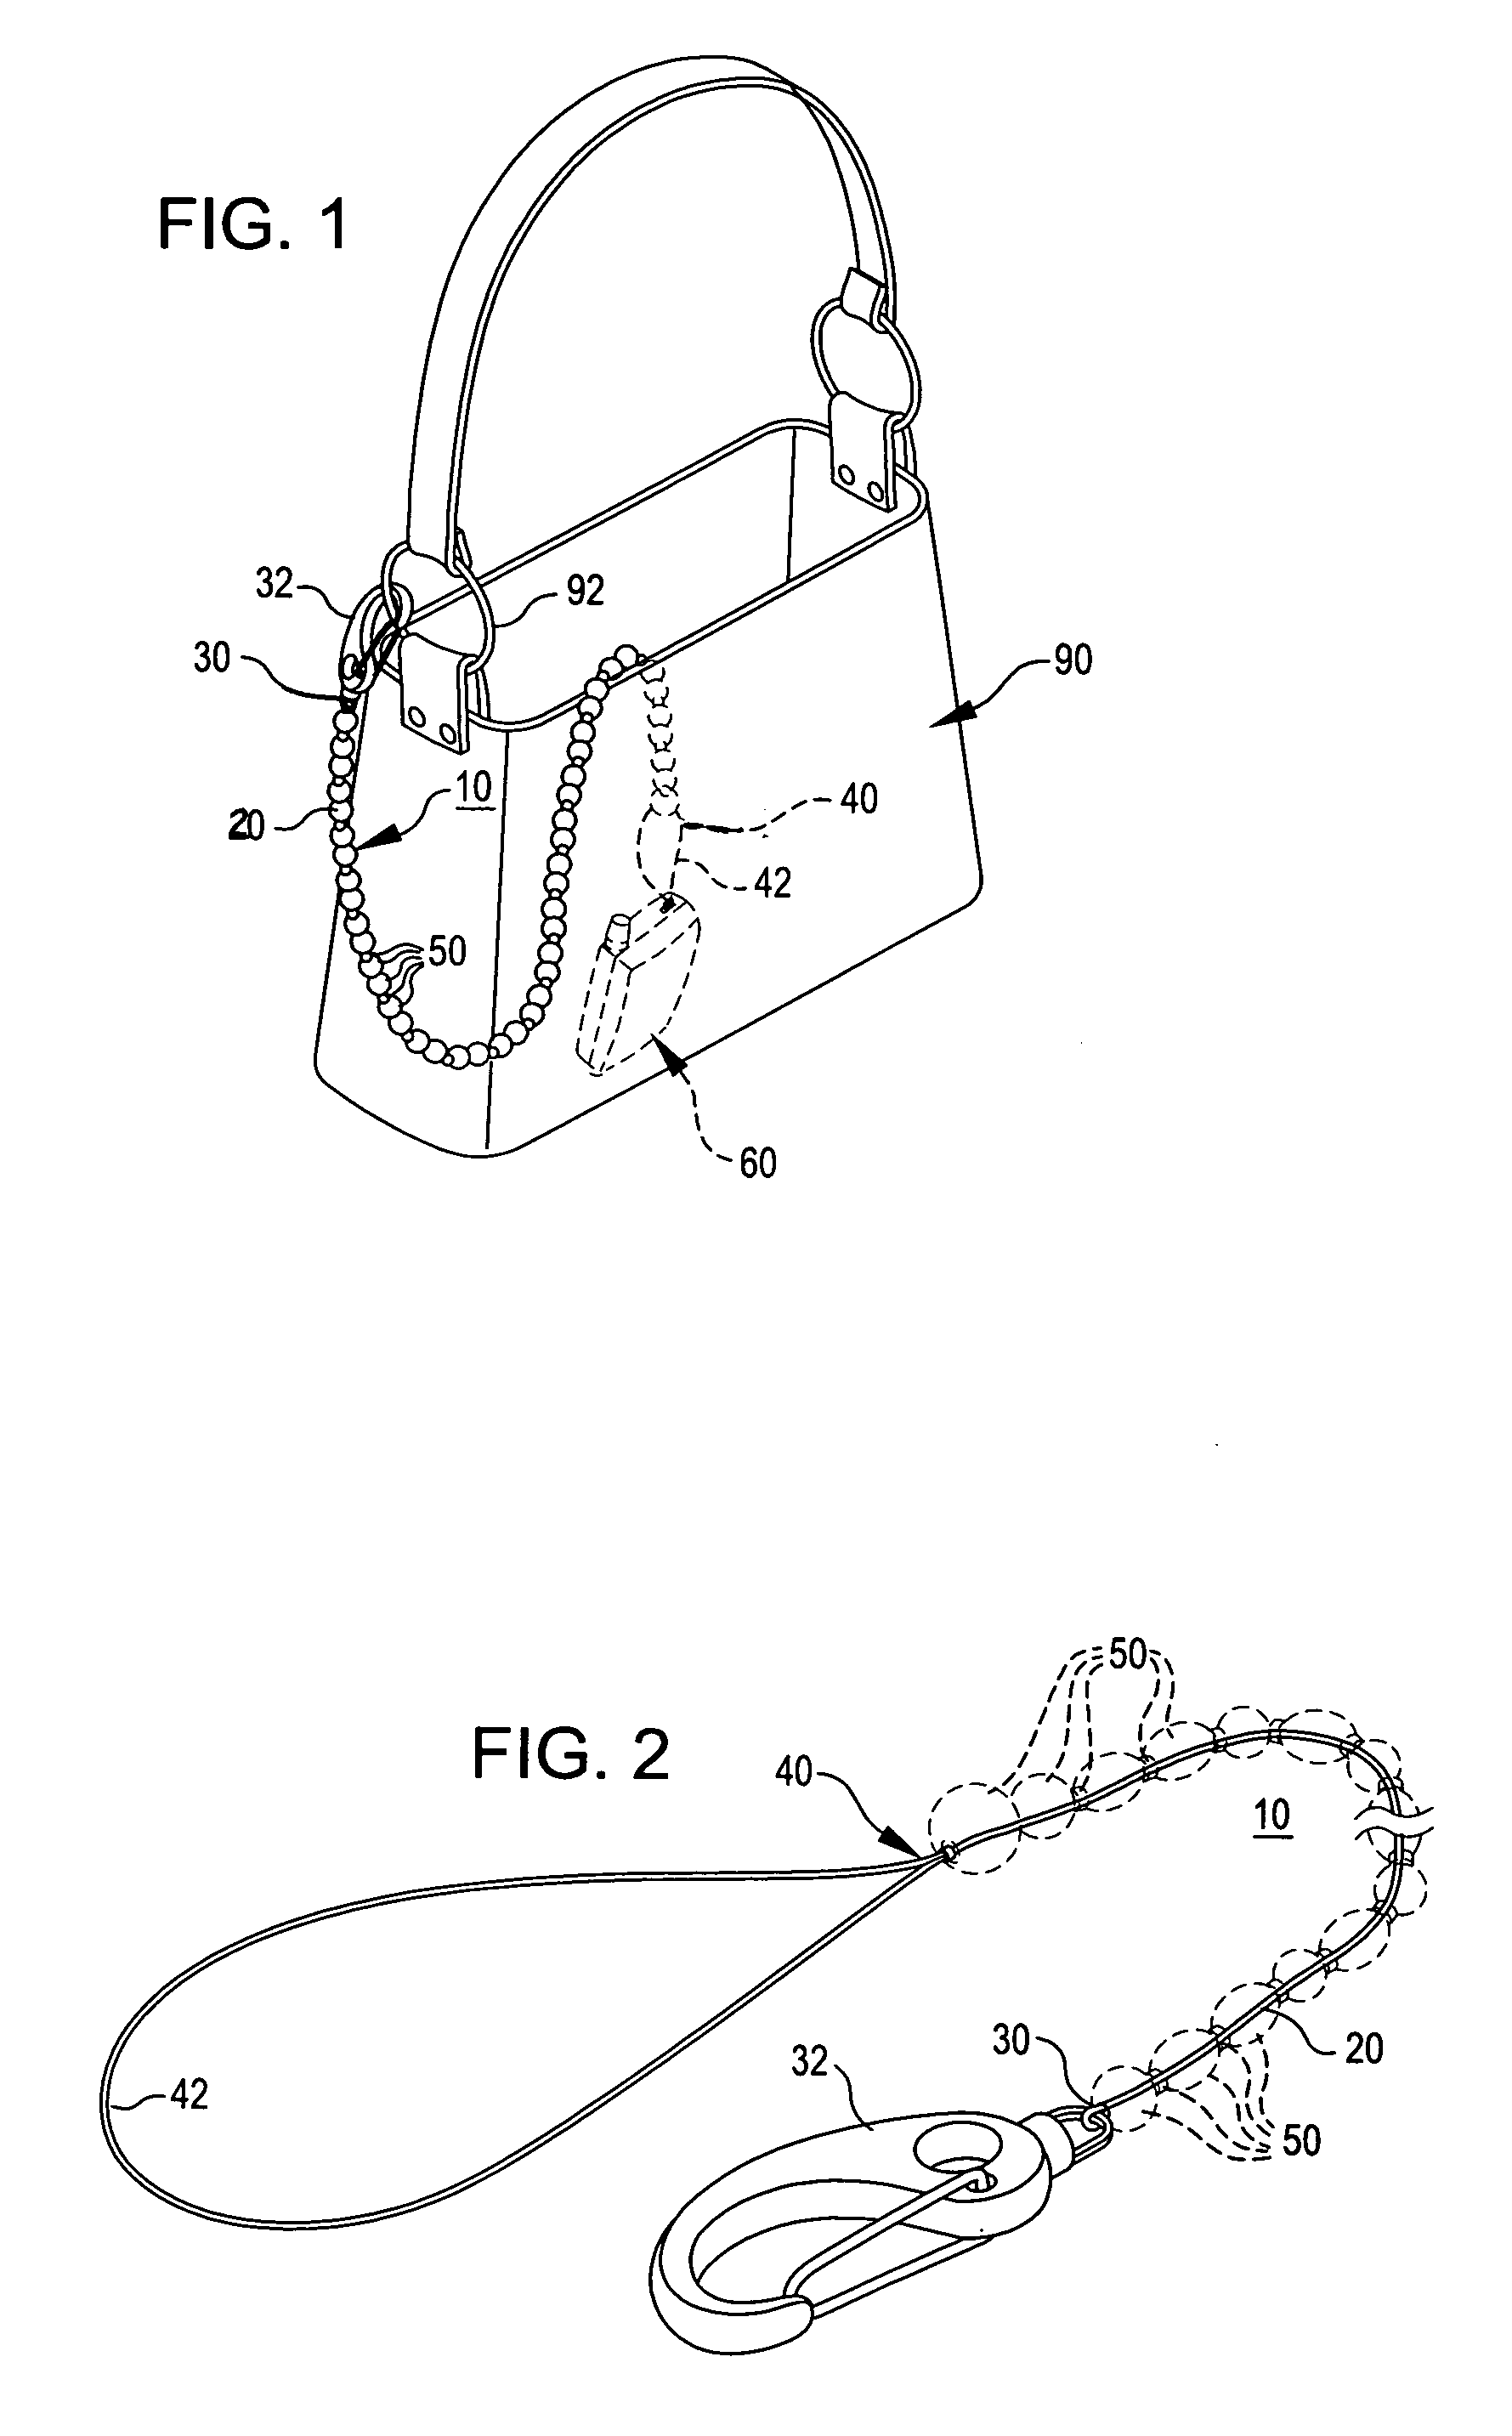 Ornamental leash for portable objects and devices